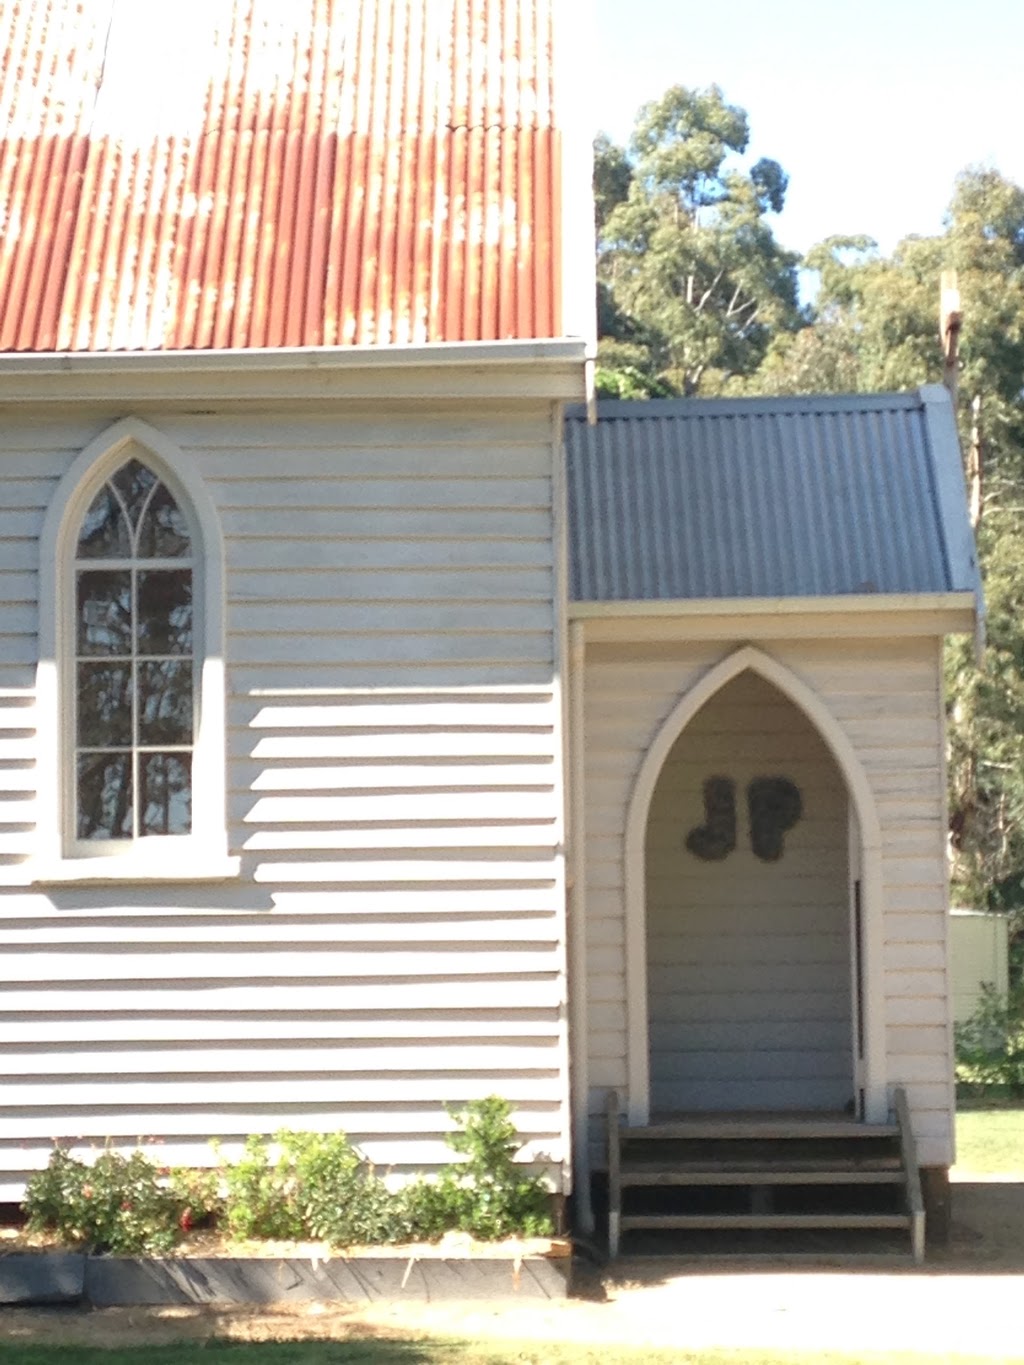 The Little Church - by appointment | church | 1385 Kyneton-Springhill Rd, Spring Hill VIC 3444, Australia | 0438567604 OR +61 438 567 604